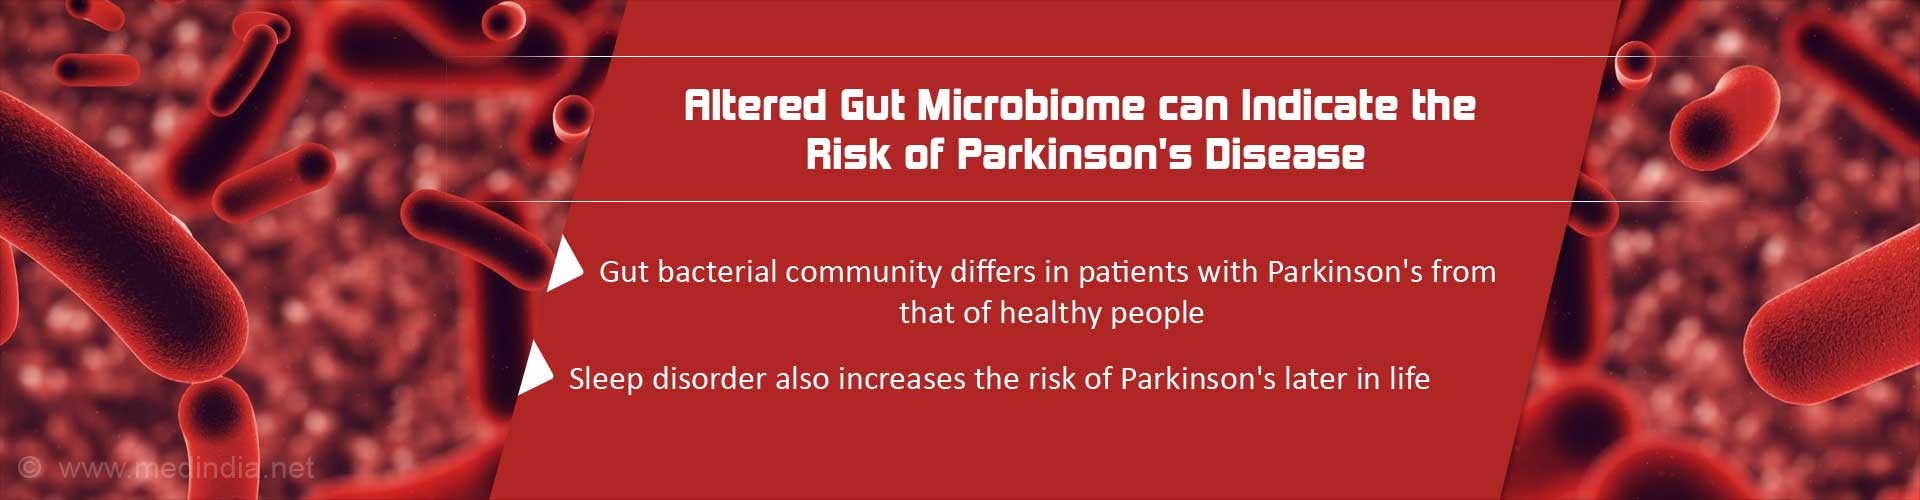 Altered gut microbiome can indicate the risk of Parkinson's disease
- Gut bacterial community differs in patients with Parkinson's from that of healthy people
- Sleep disorder also increases risk of Parkinson's later in life